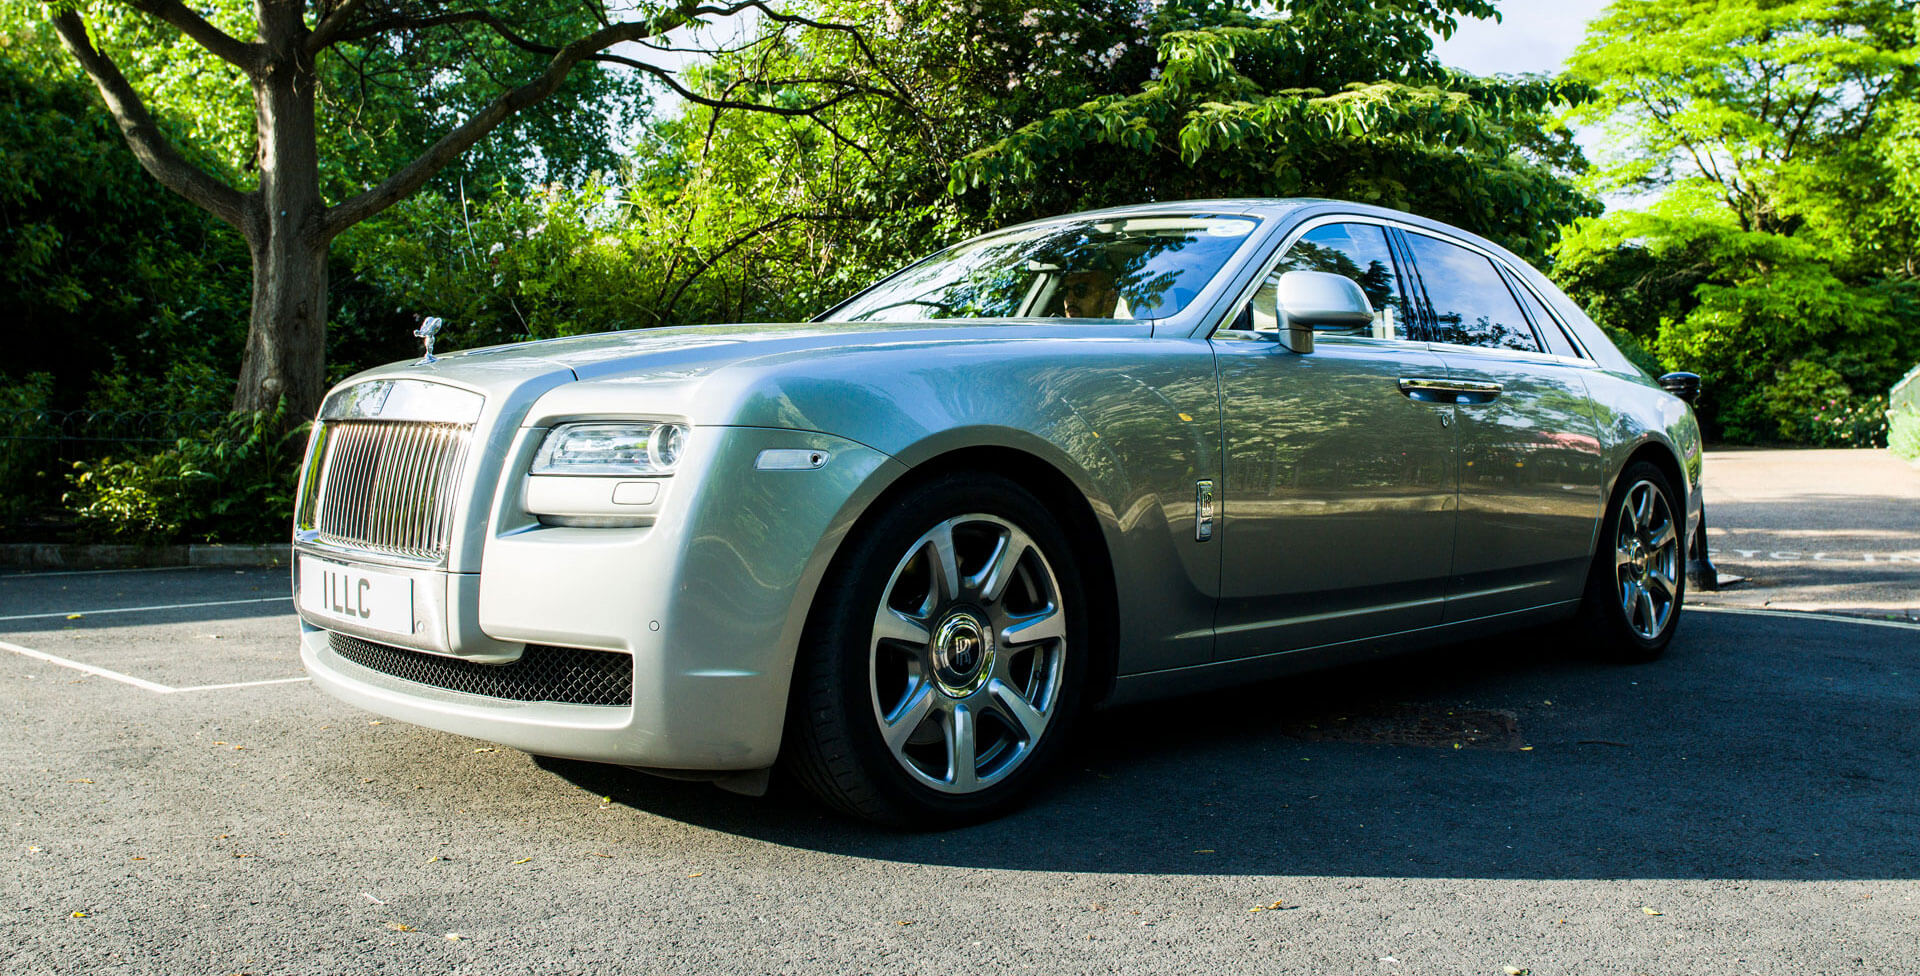 Why Hire a Chauffeured-Driven Rolls Royce Ghost in London?